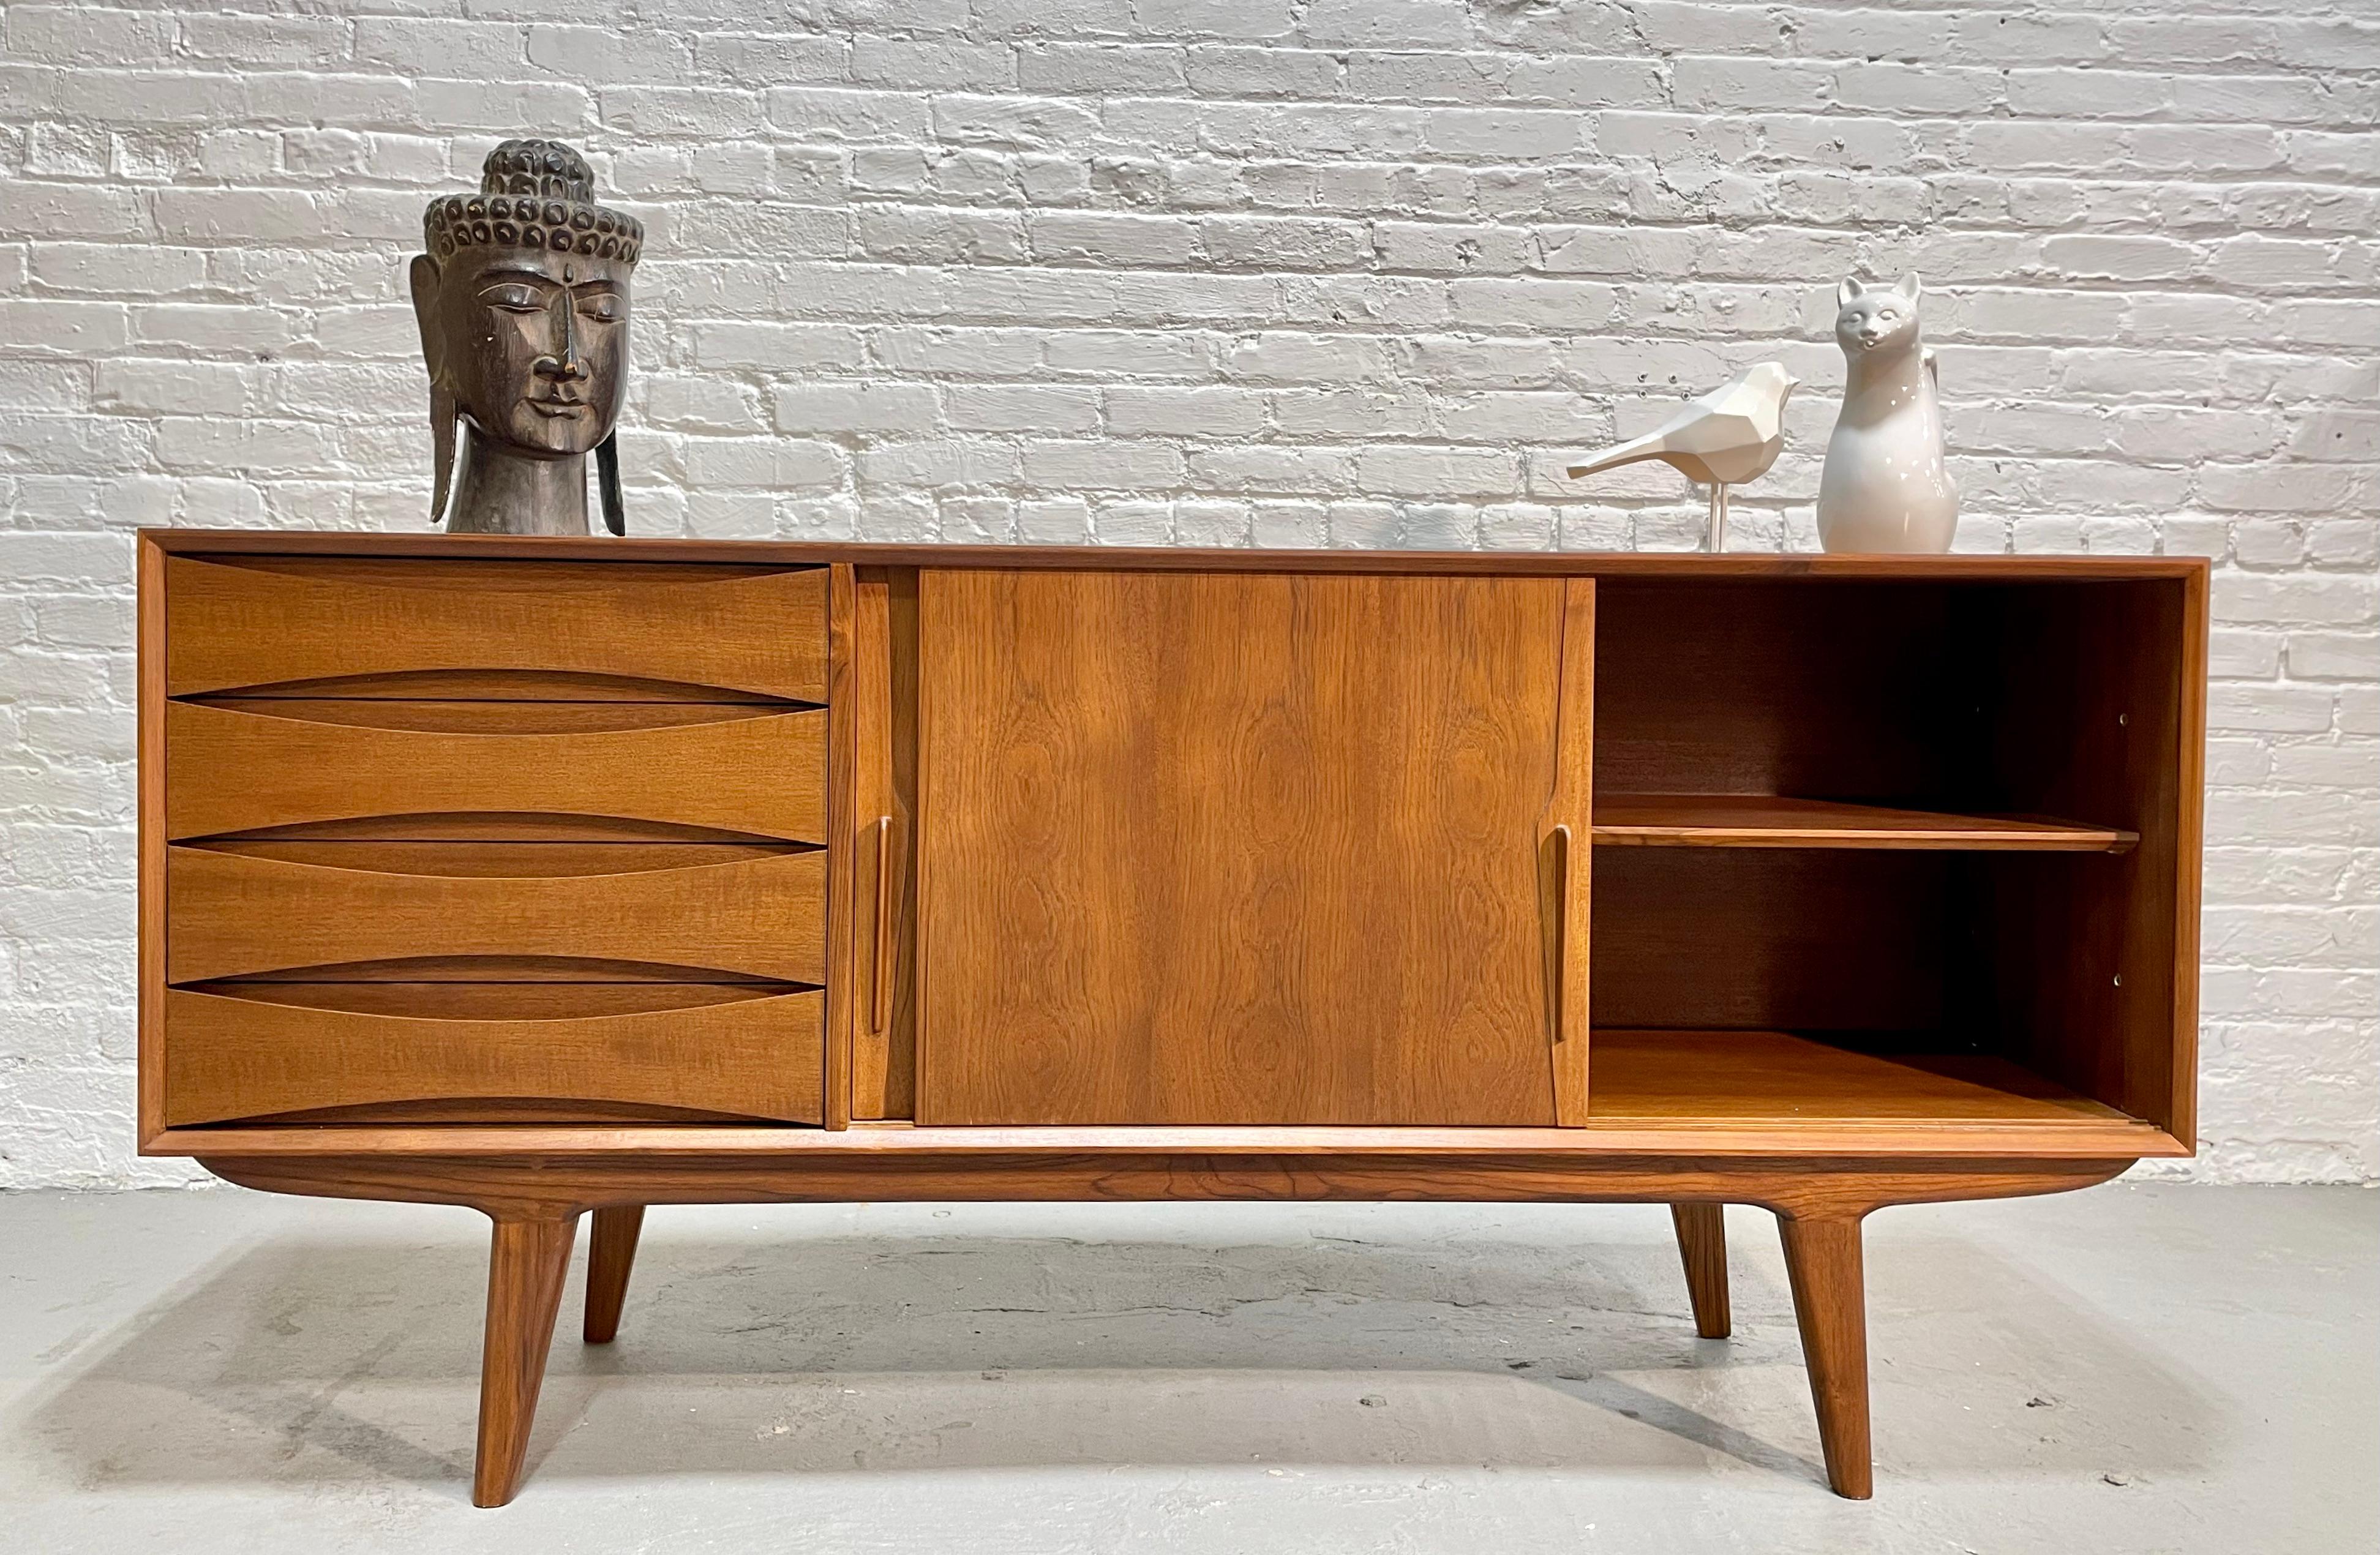  Handsome Mid Century MODERN styled SIDEBOARD / CREDENZA media stand 2